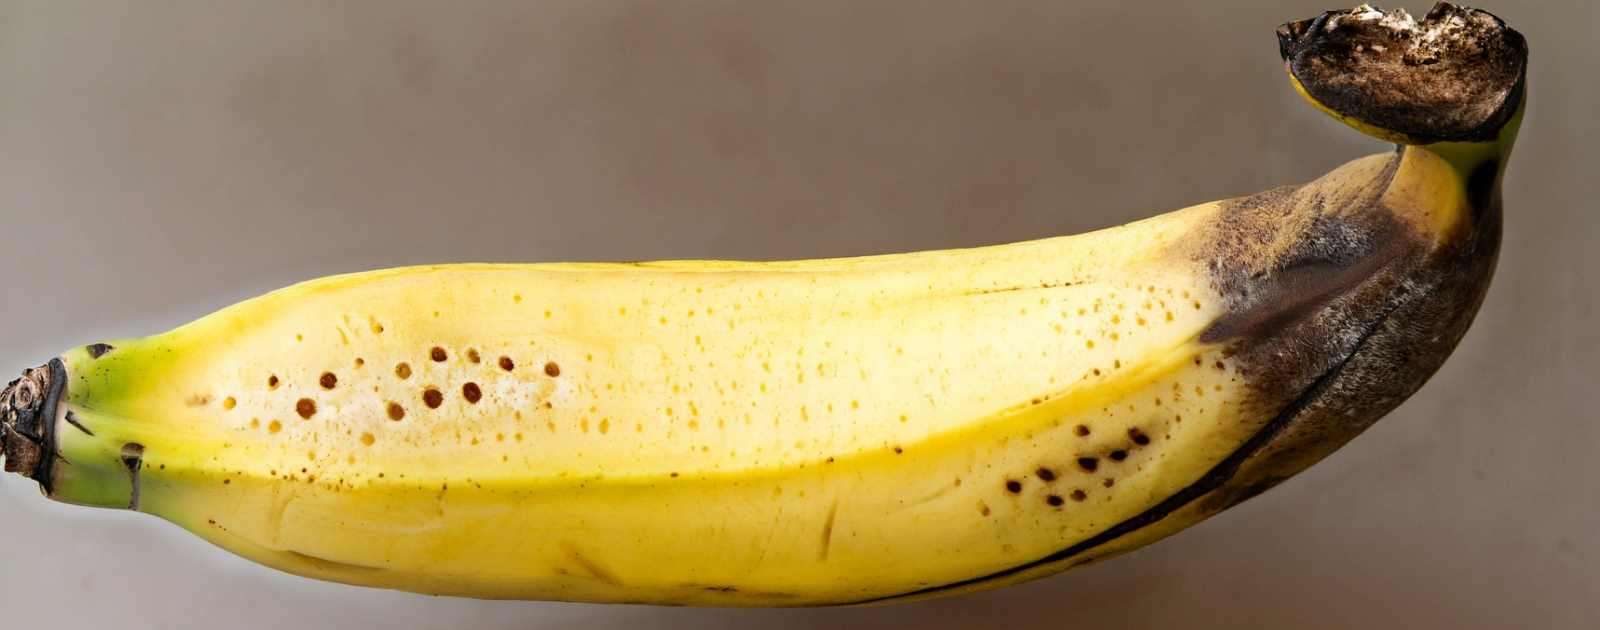 20 Health Benefits Of Eating Burro Bananas [Types, Nutrition, and Comparison]